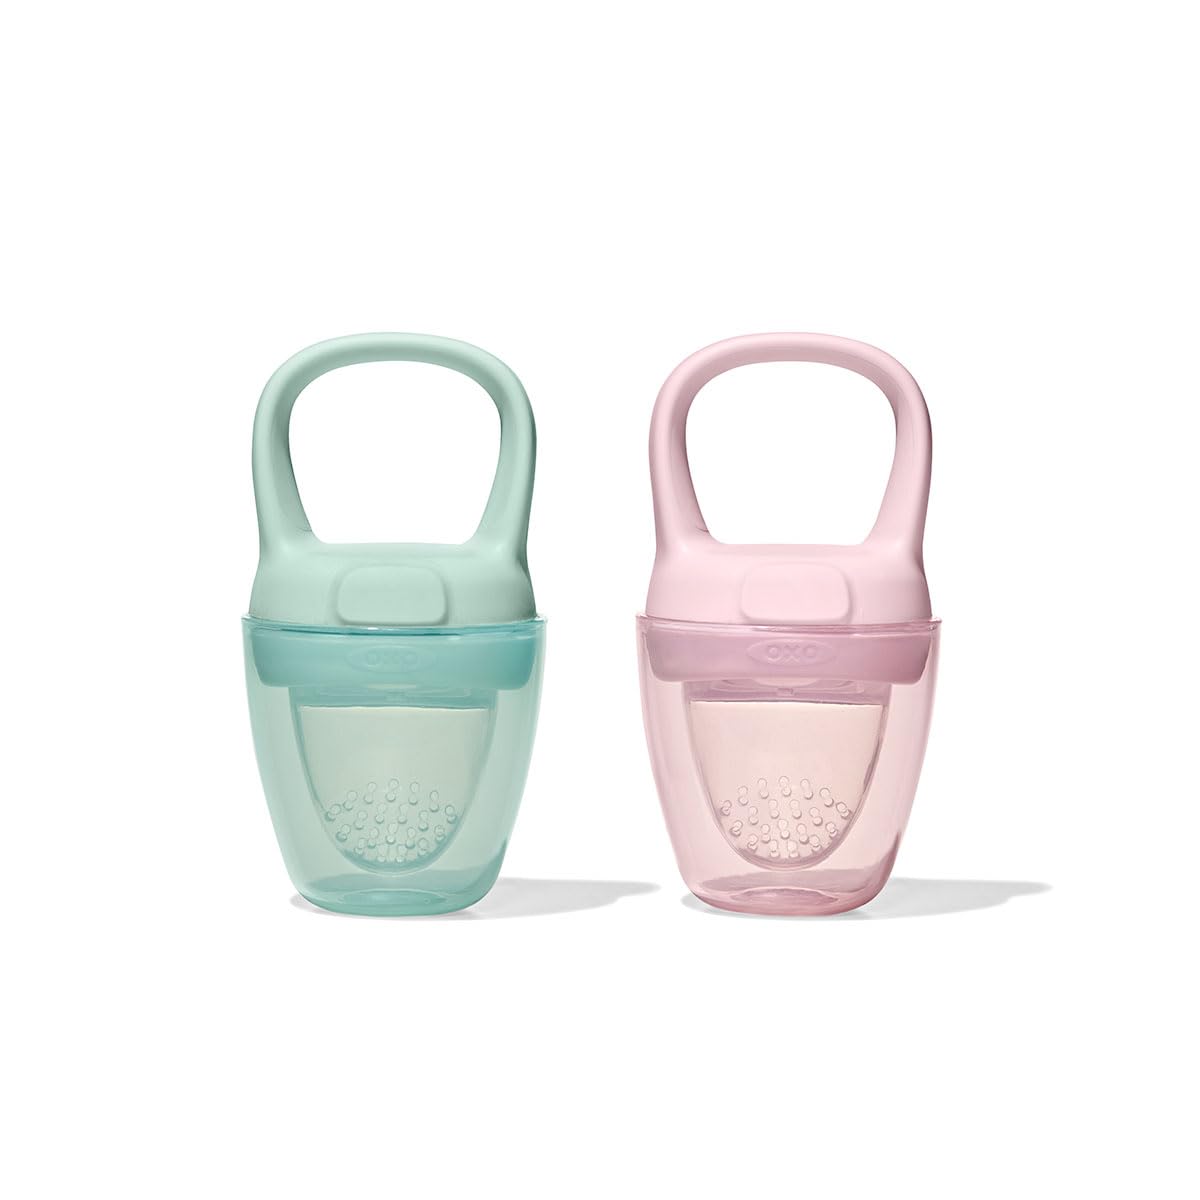 OXO Tot Silicone Self-Feeder 2 Pack - Opal and Blossom